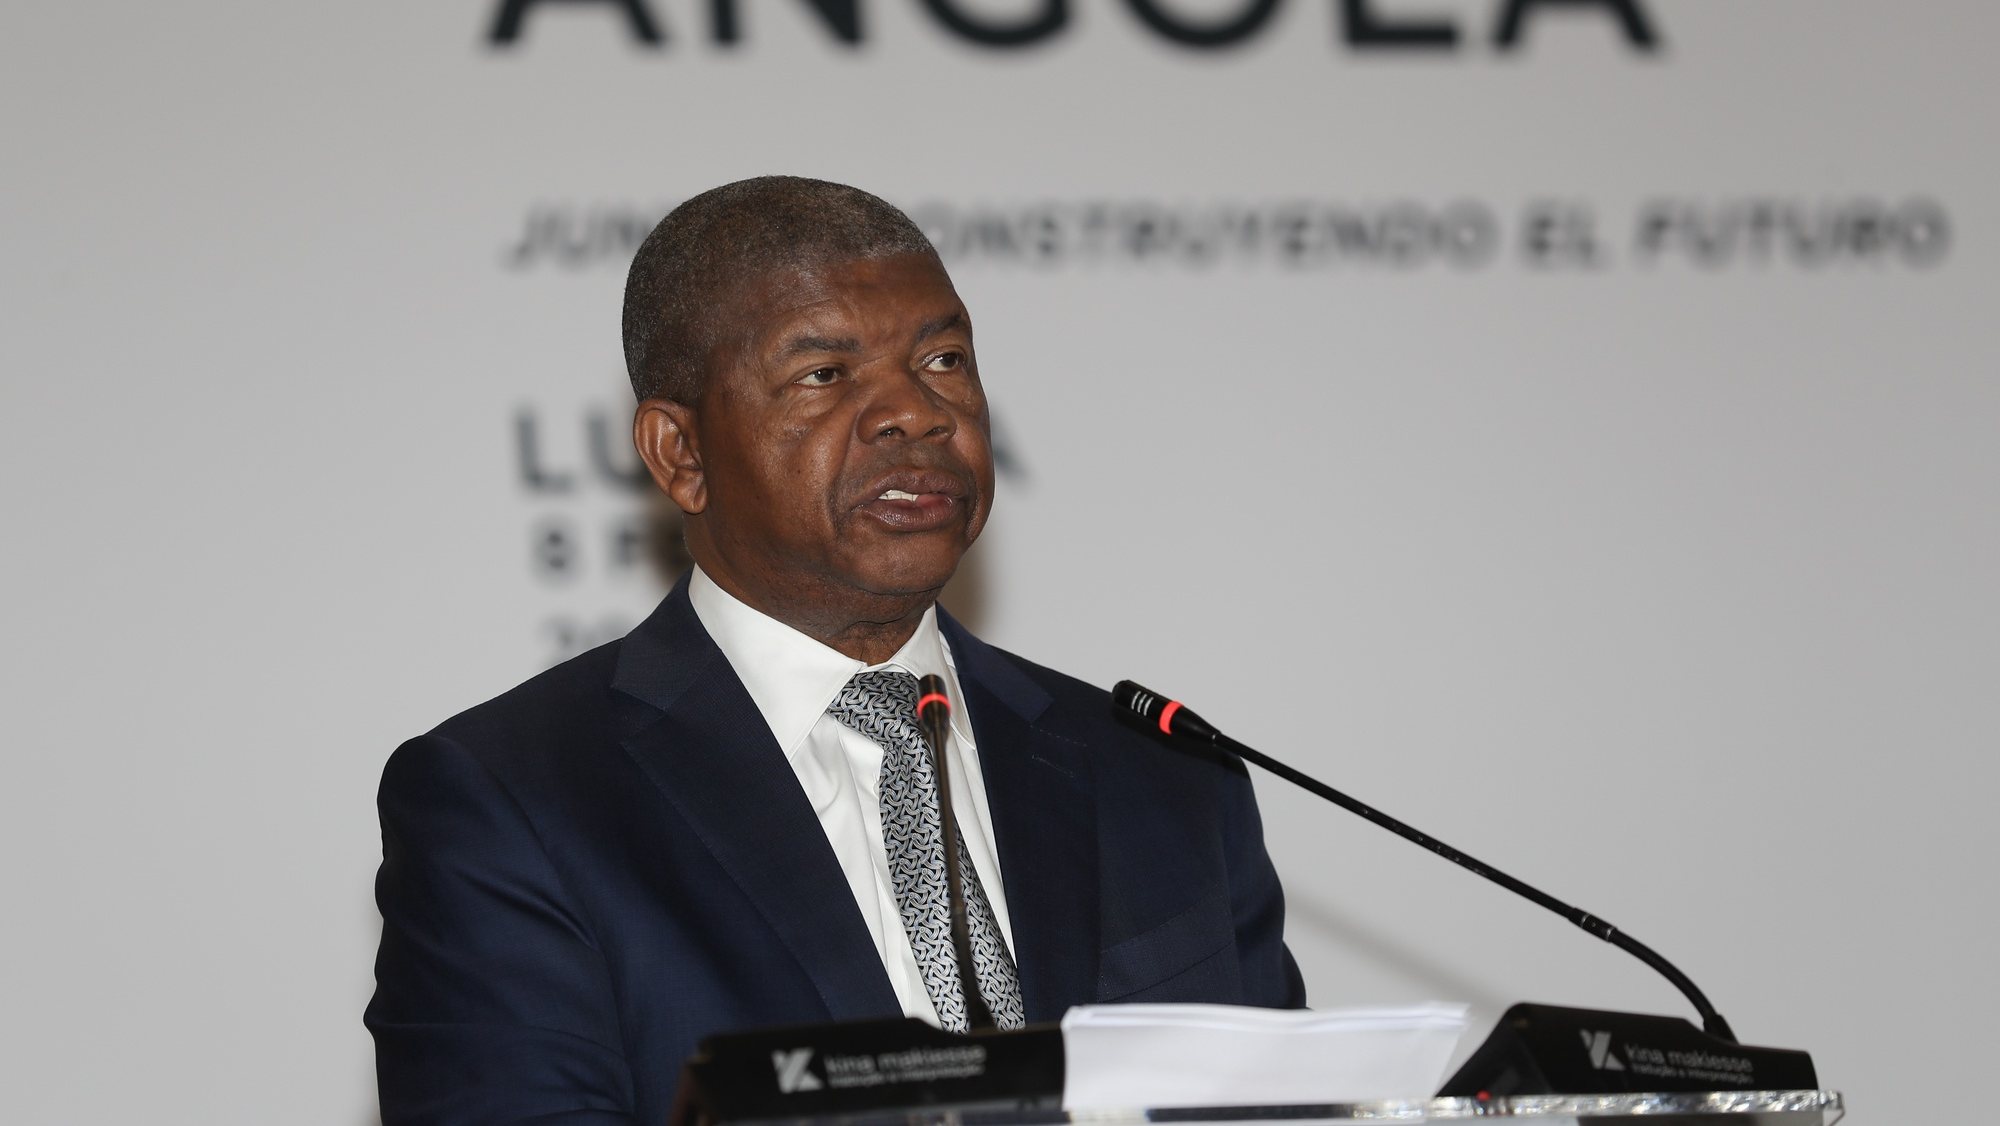 Angola&#039;s President Joao Lourenco and Felipe VI King of Spain (not seen) attend a Business Forum on the last day visit in Luanda, Angola, 08 February 2023. AMPE ROGERIO/LUSA